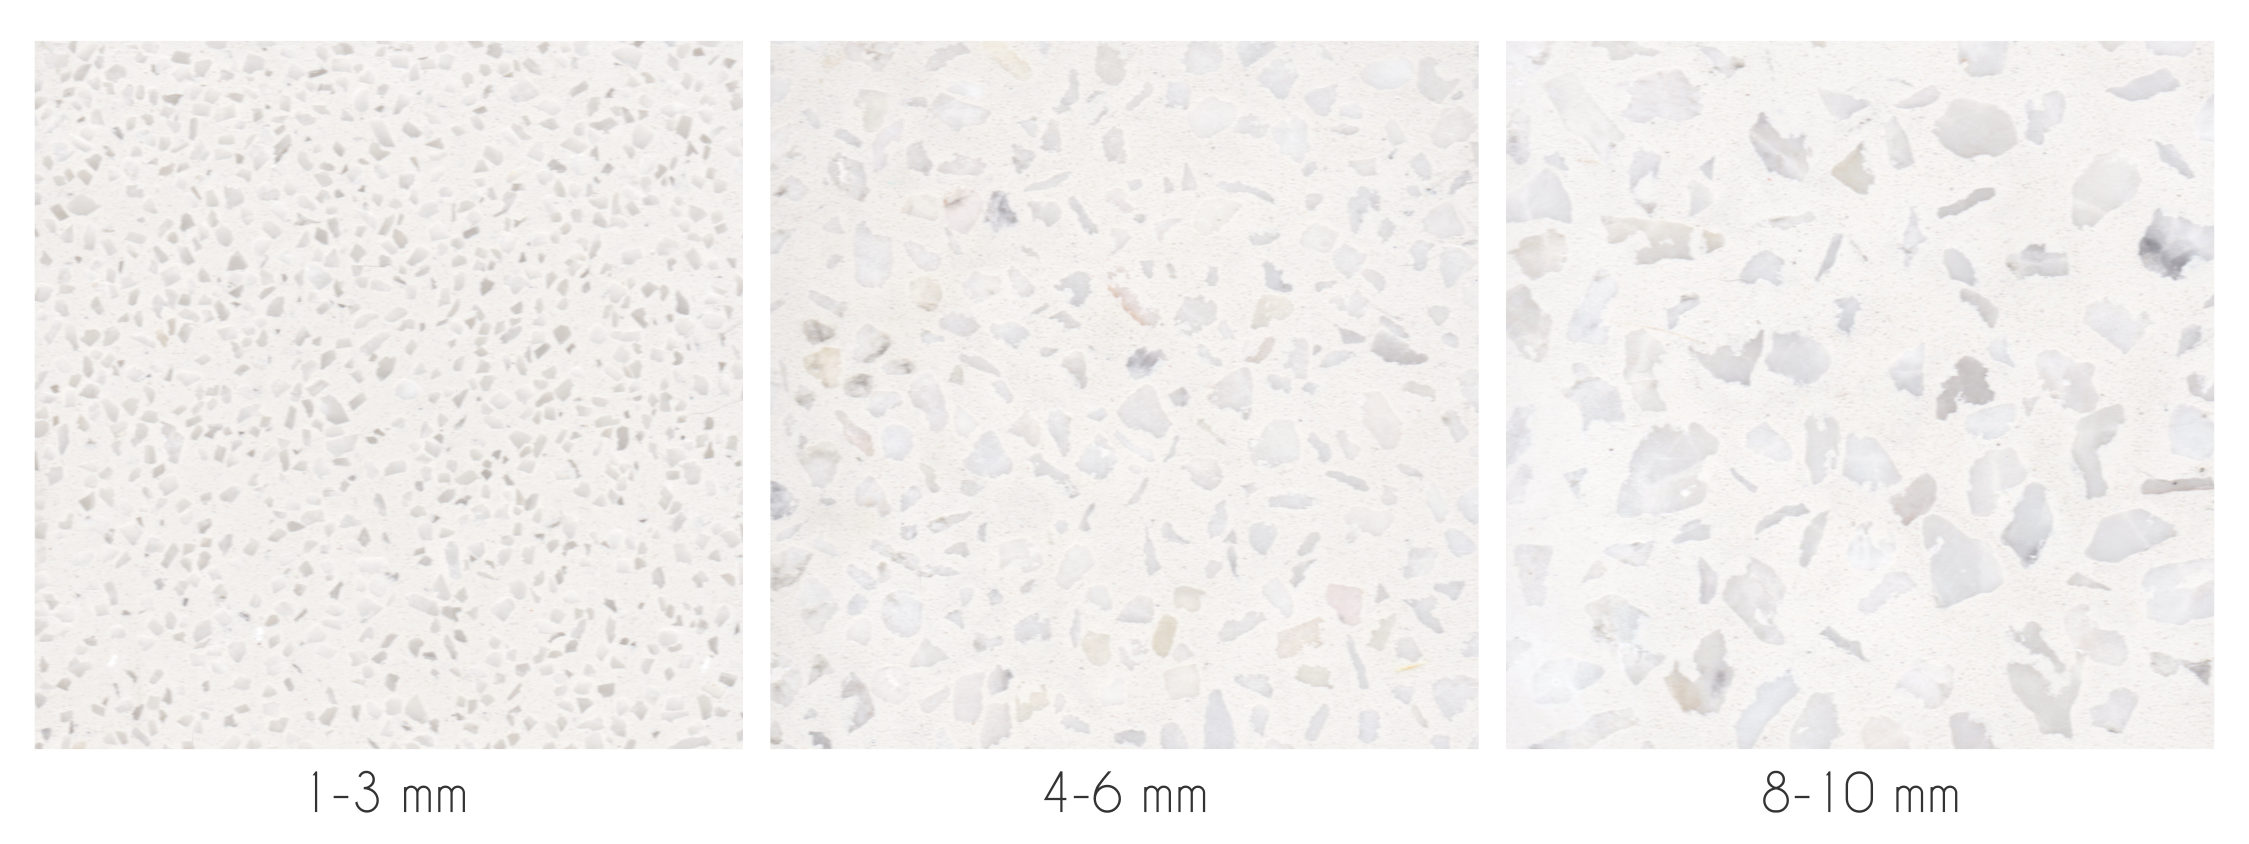 photos showing the different size terrazzo chips available